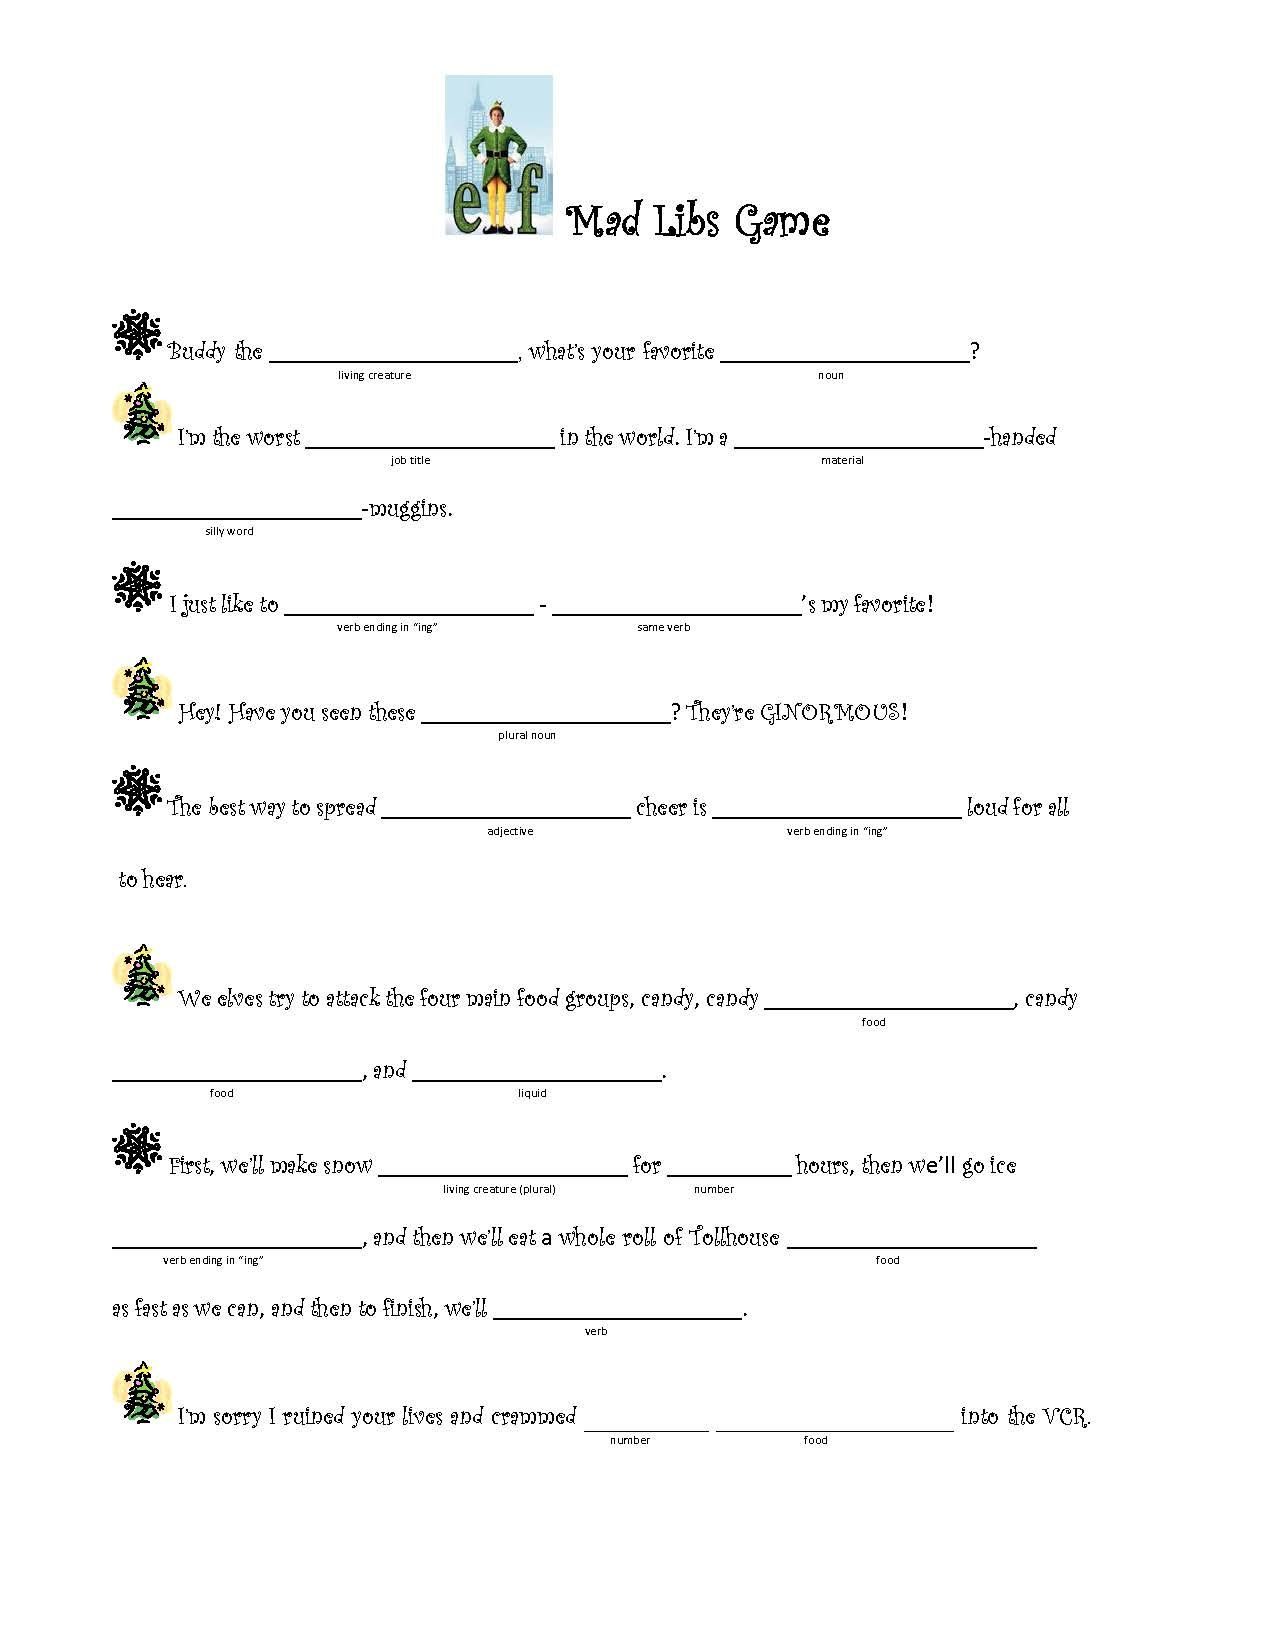 Fun Mad Libs Game I Created Using Quotes From The Buddy The Elf Movie 